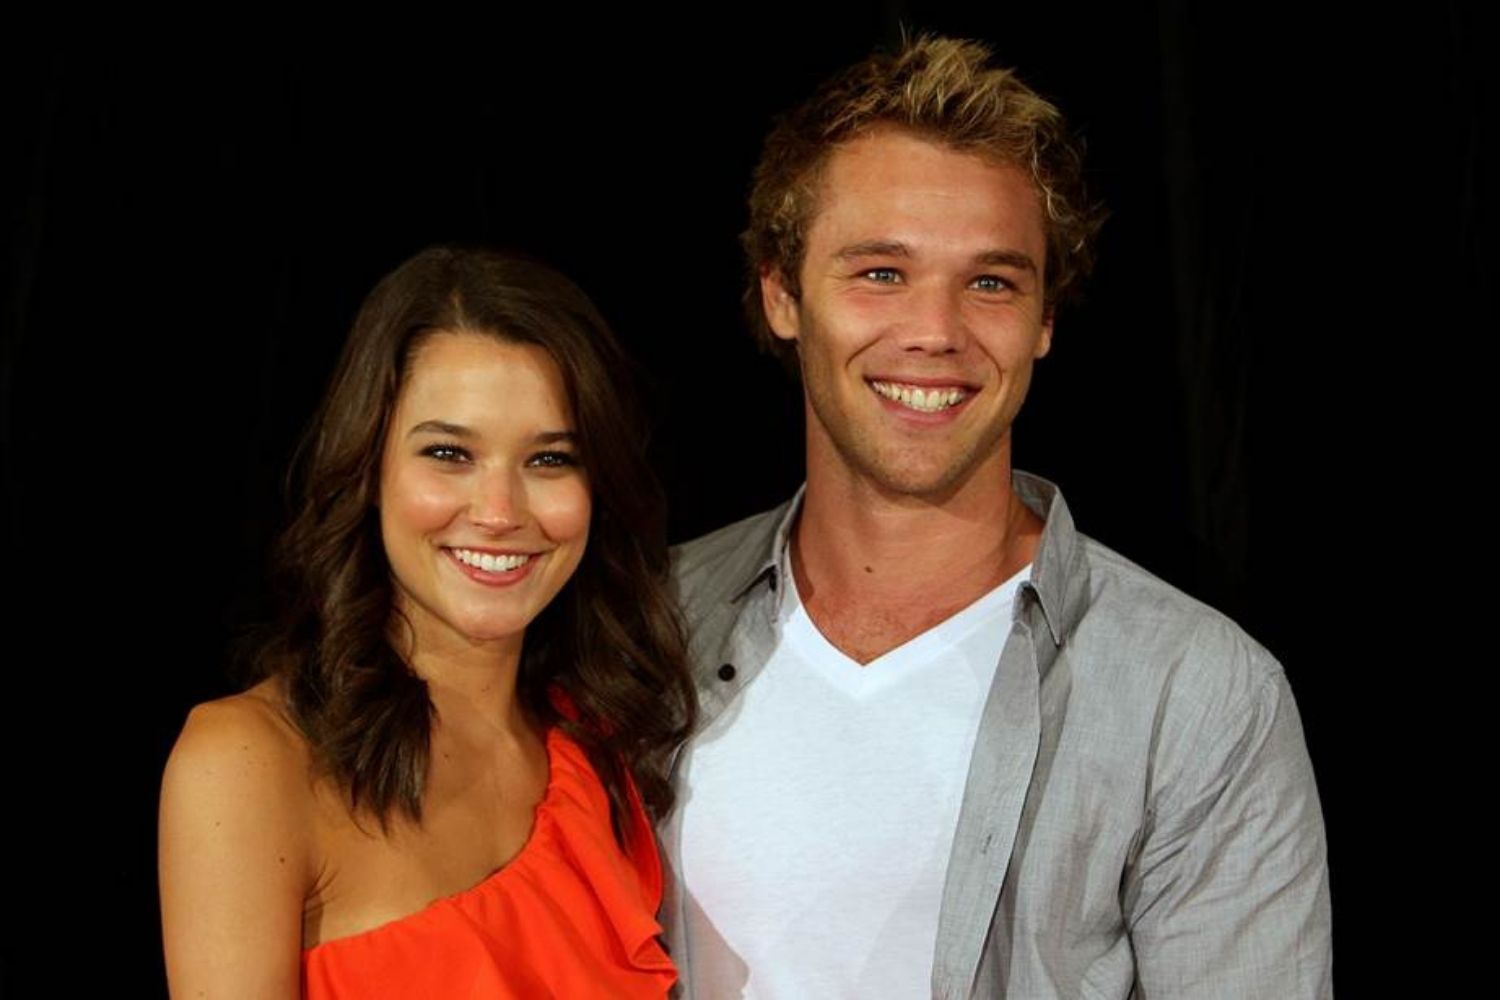 Lincoln Lewis and Rhiannon Fish